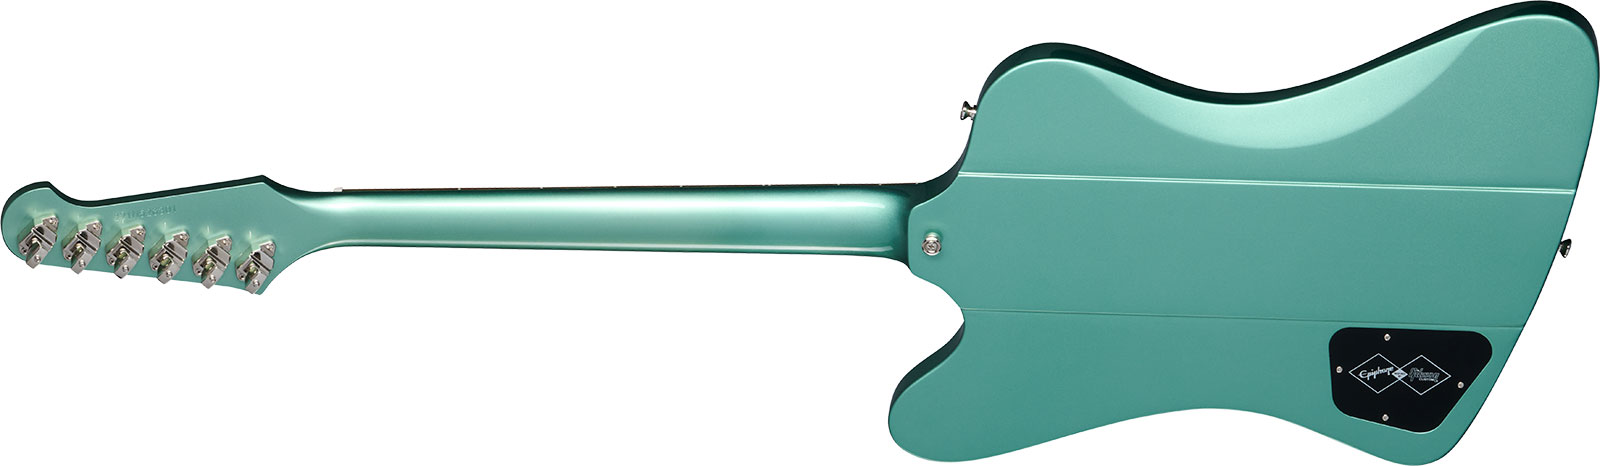 Epiphone Firebird I 1963 Inspired By Gibson Custom 1mh Ht Lau - Inverness Green - Retro rock electric guitar - Variation 1